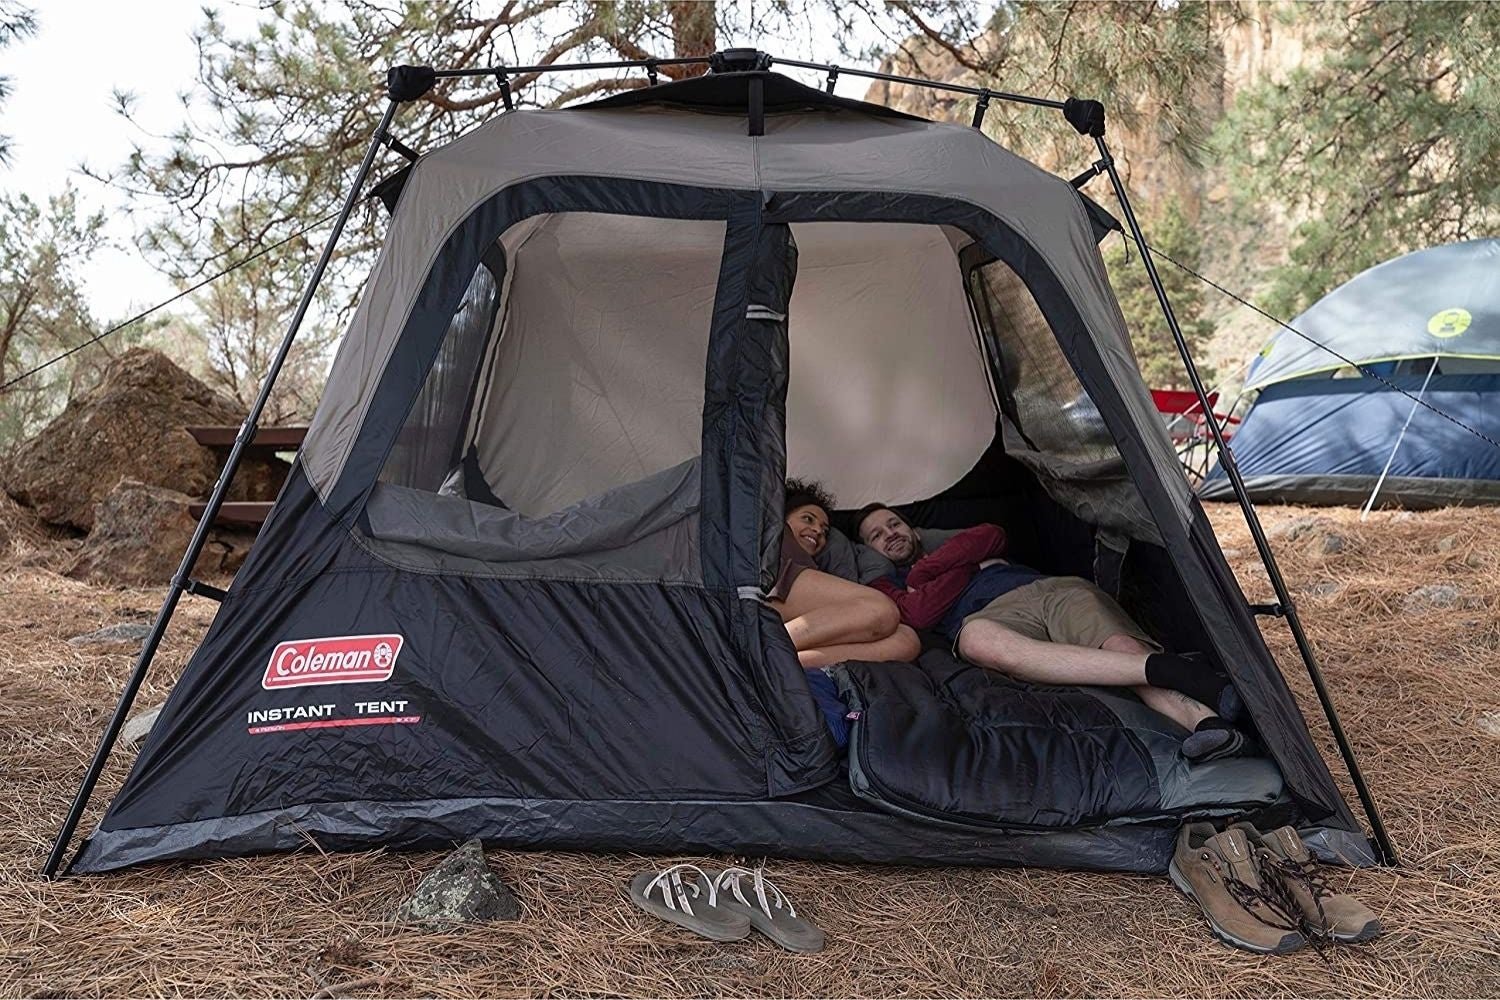 The 15 Best Gifts for Campers Who Love the Outdoors in Any Season